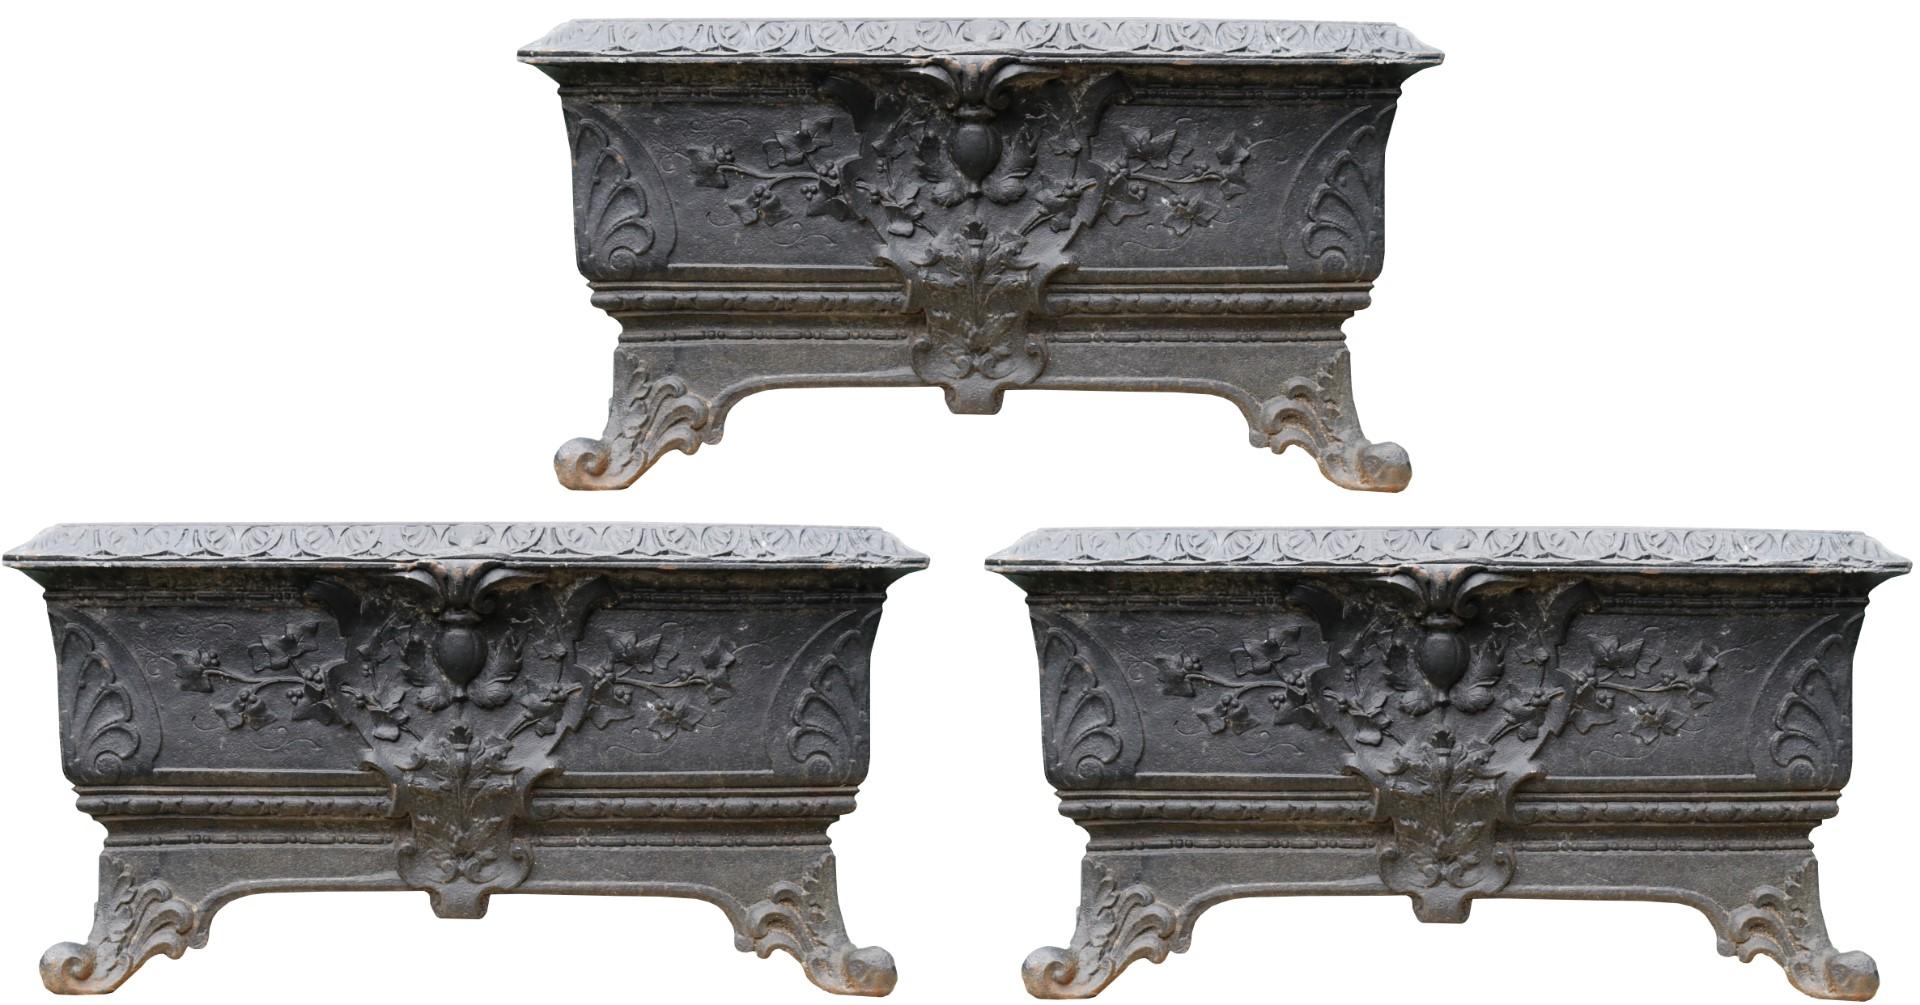 Three cast iron planters of rectangular form, with flared sides and scroll feet, the body ornamented with central cartouche.

Additional Dimensions (Each)

Height 38 cm

Width 73.5 cm

Depth 36.5 cm

Opening Height 29 cm

Opening Width